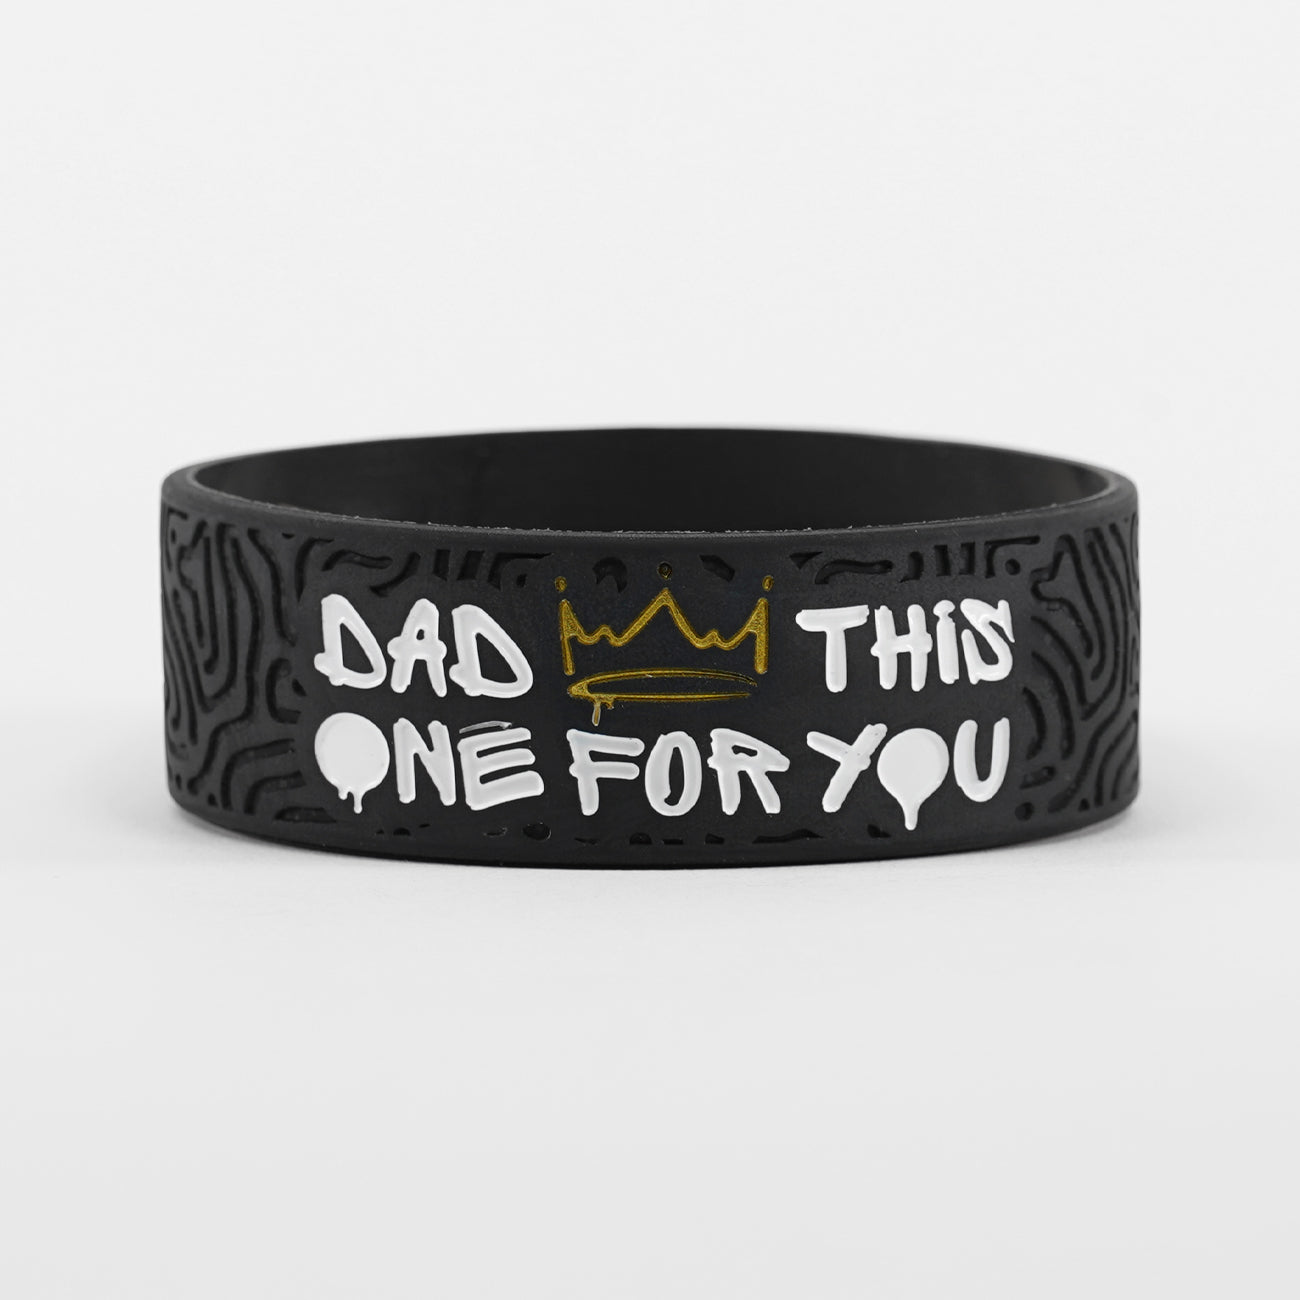 Dad This One For You 1 Inch Wristband